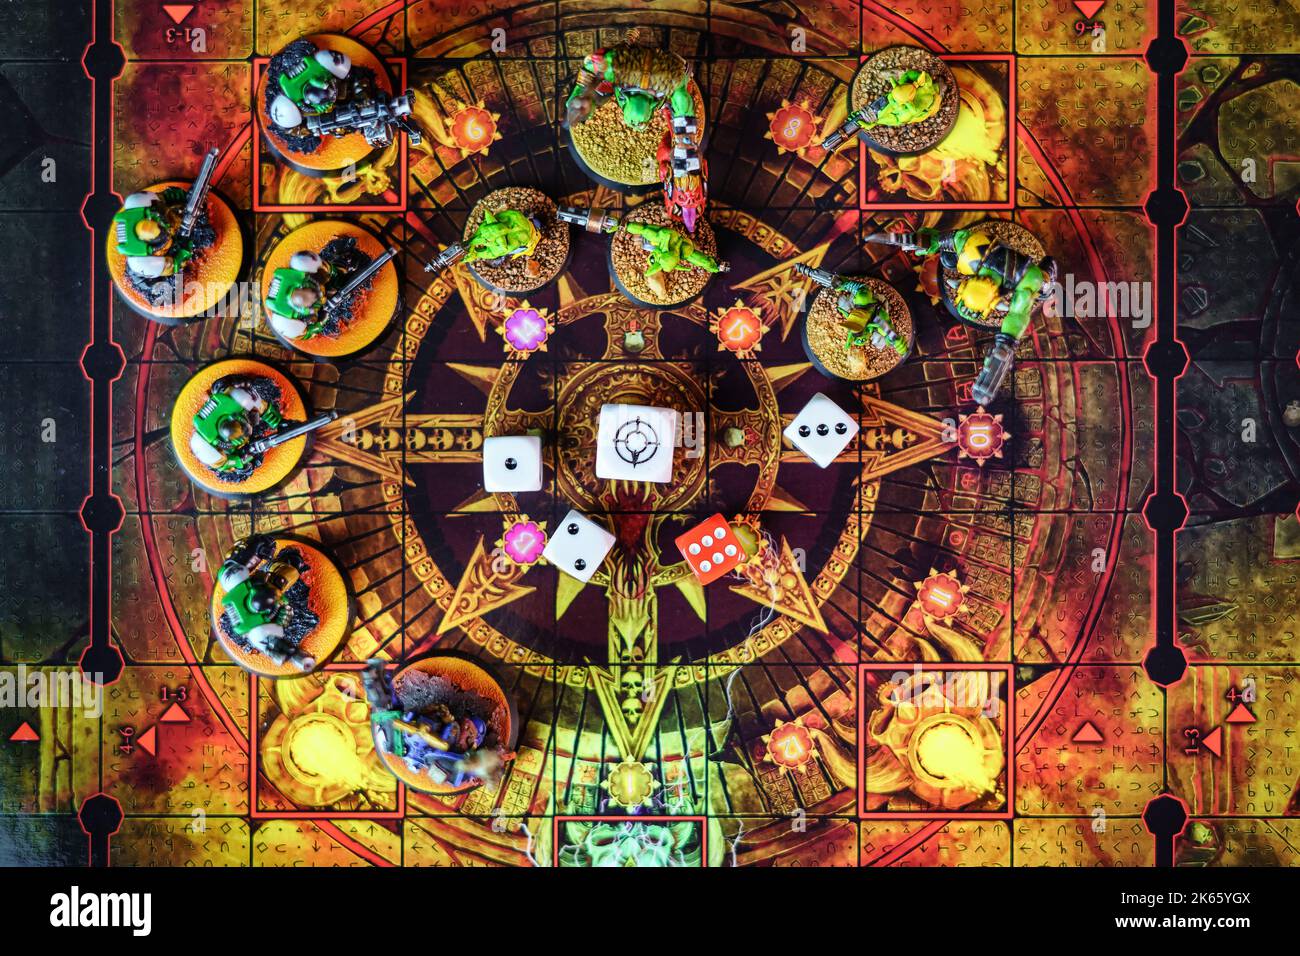 Board game board seen from above, with figures to participate in the role-playing game. Stock Photo